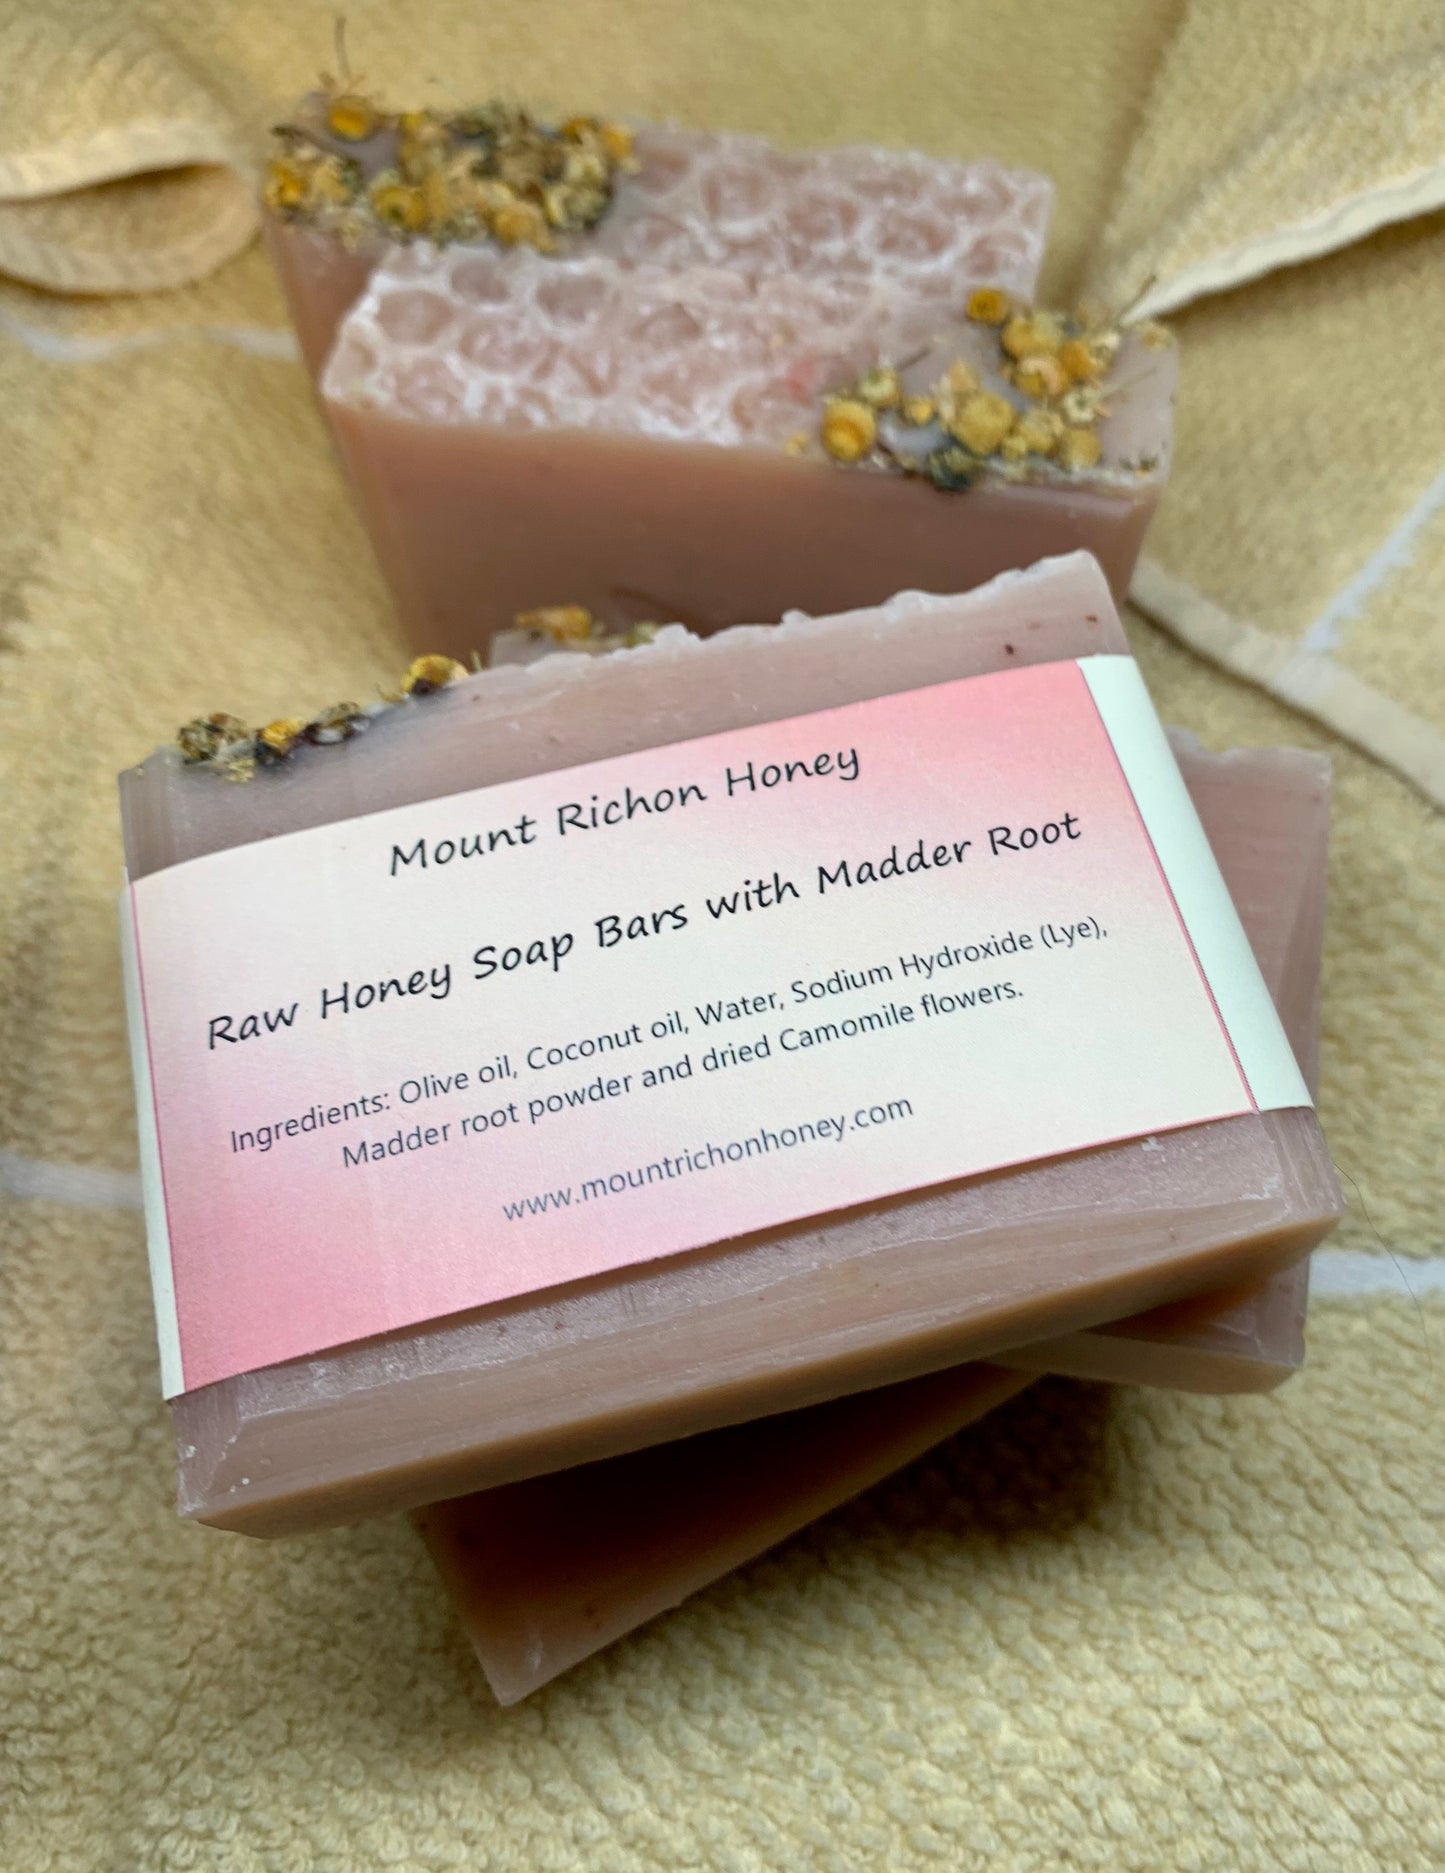 Raw Honey Soap with Madder Root (Fragrance Free)